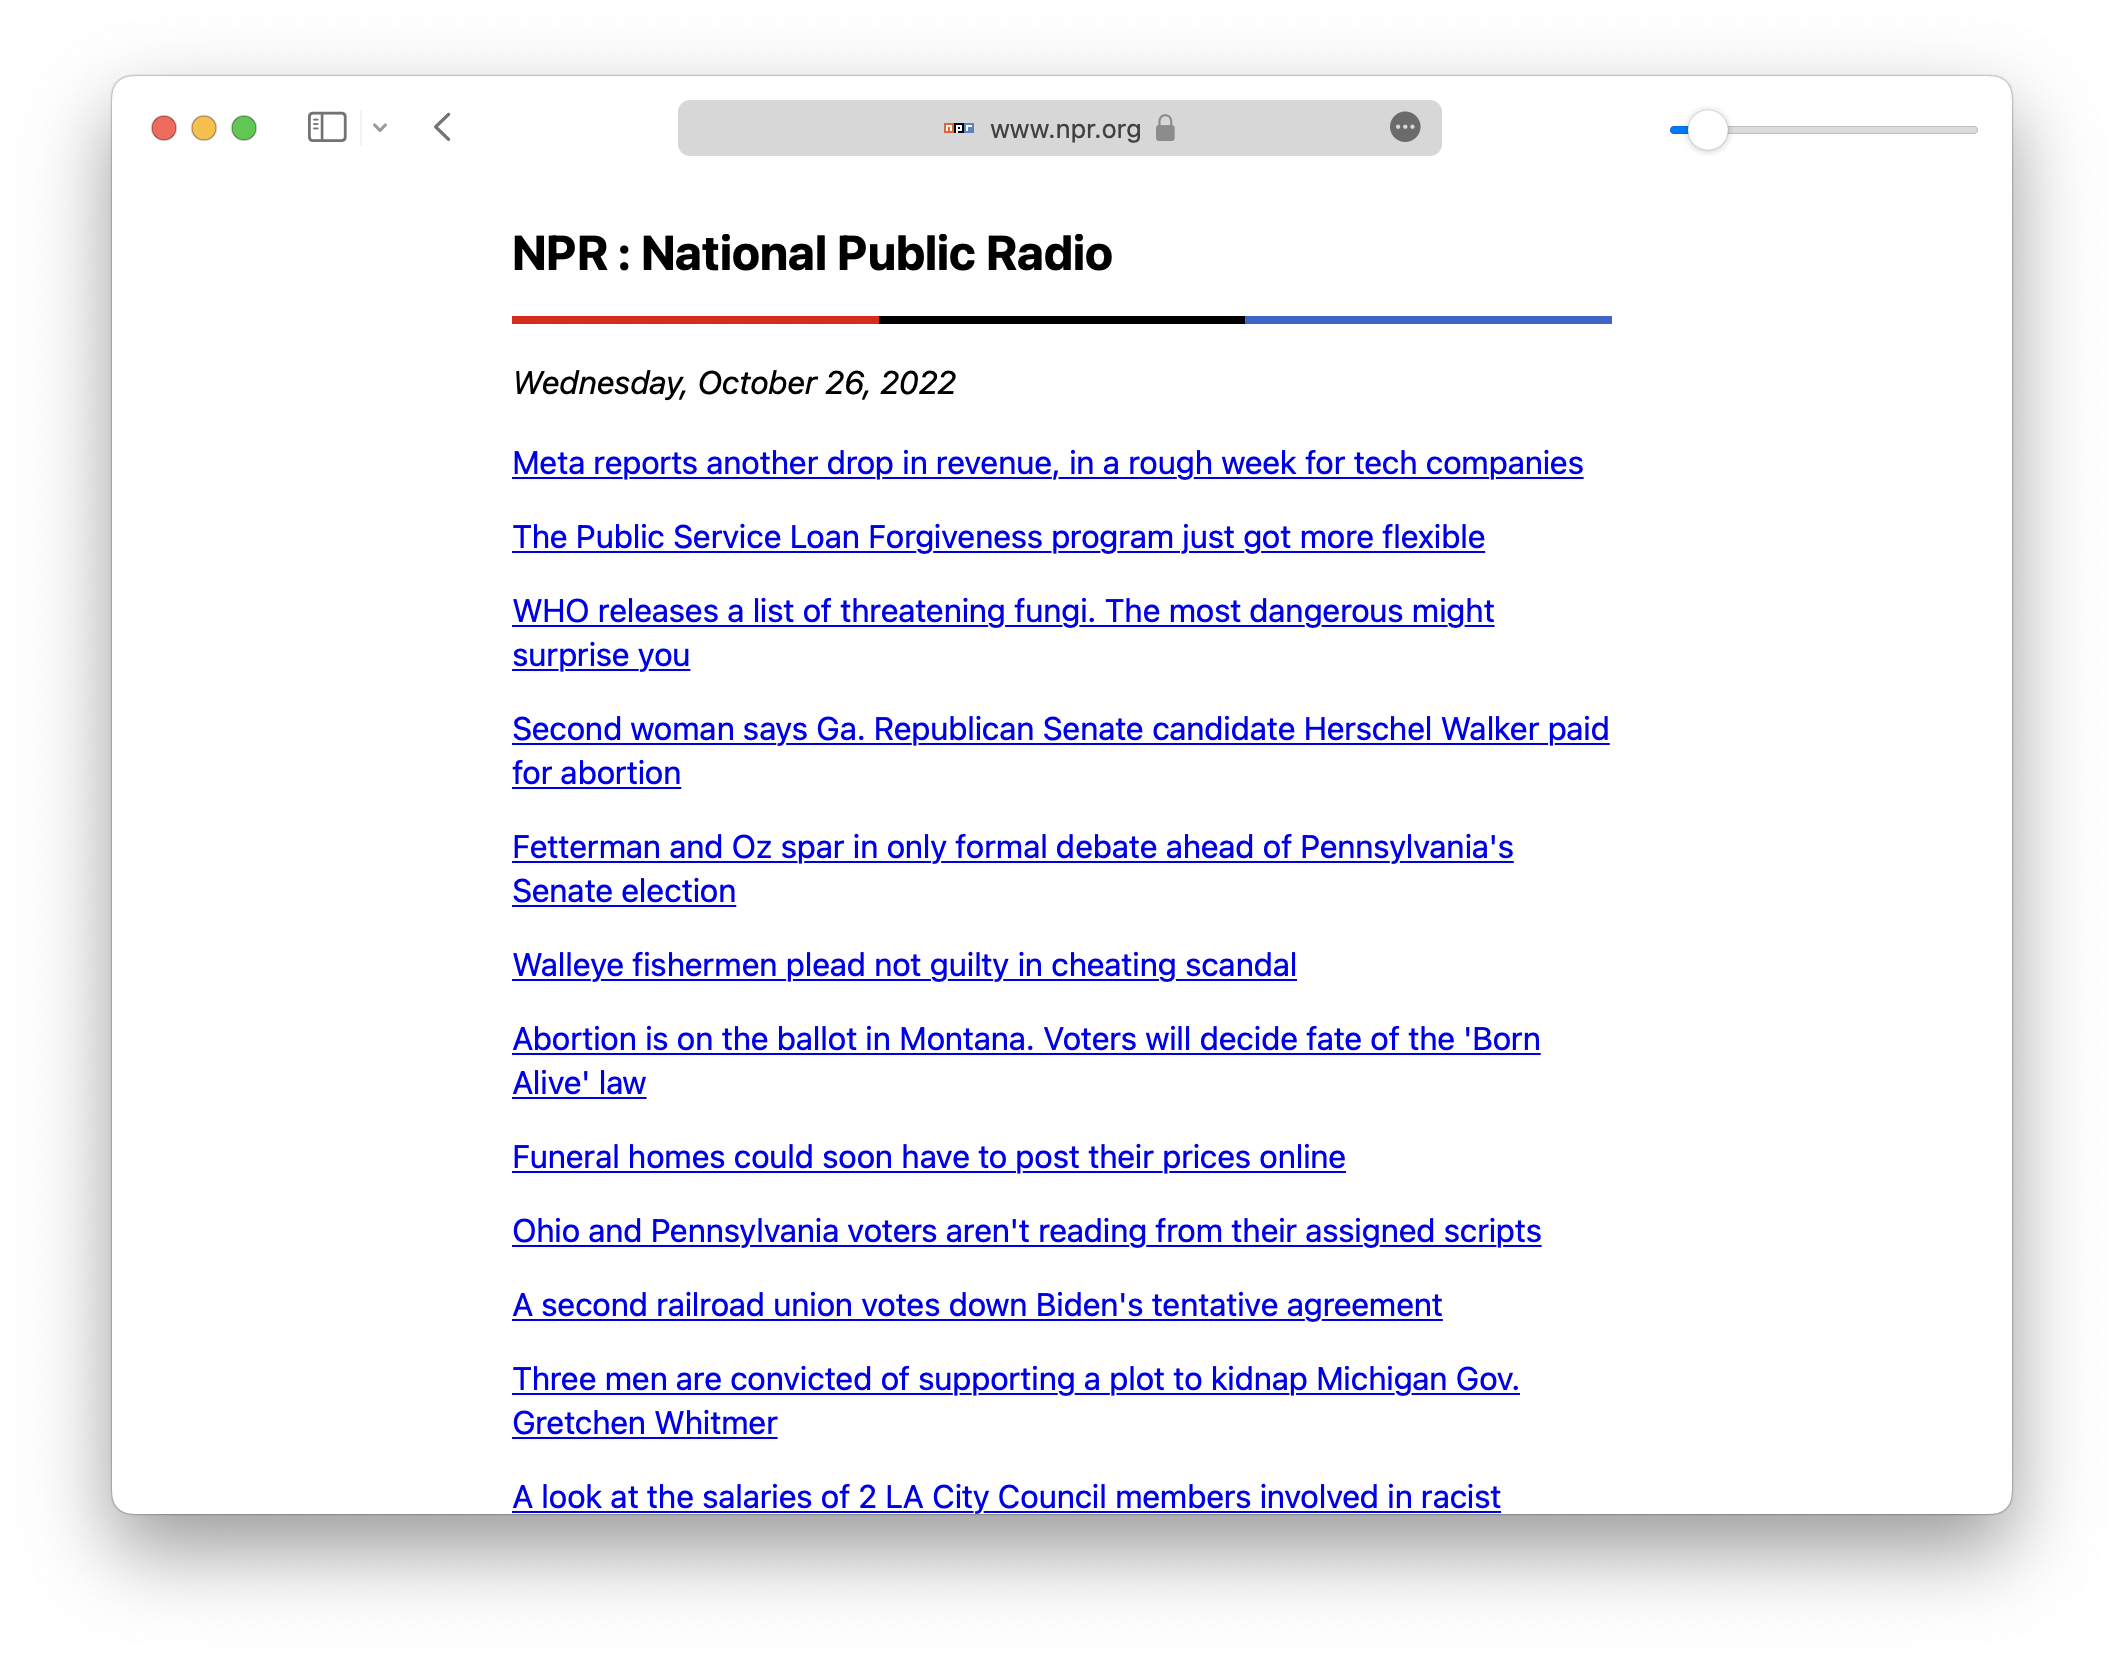 Screenshot of NPRs text-only homepage with styled text and layout.